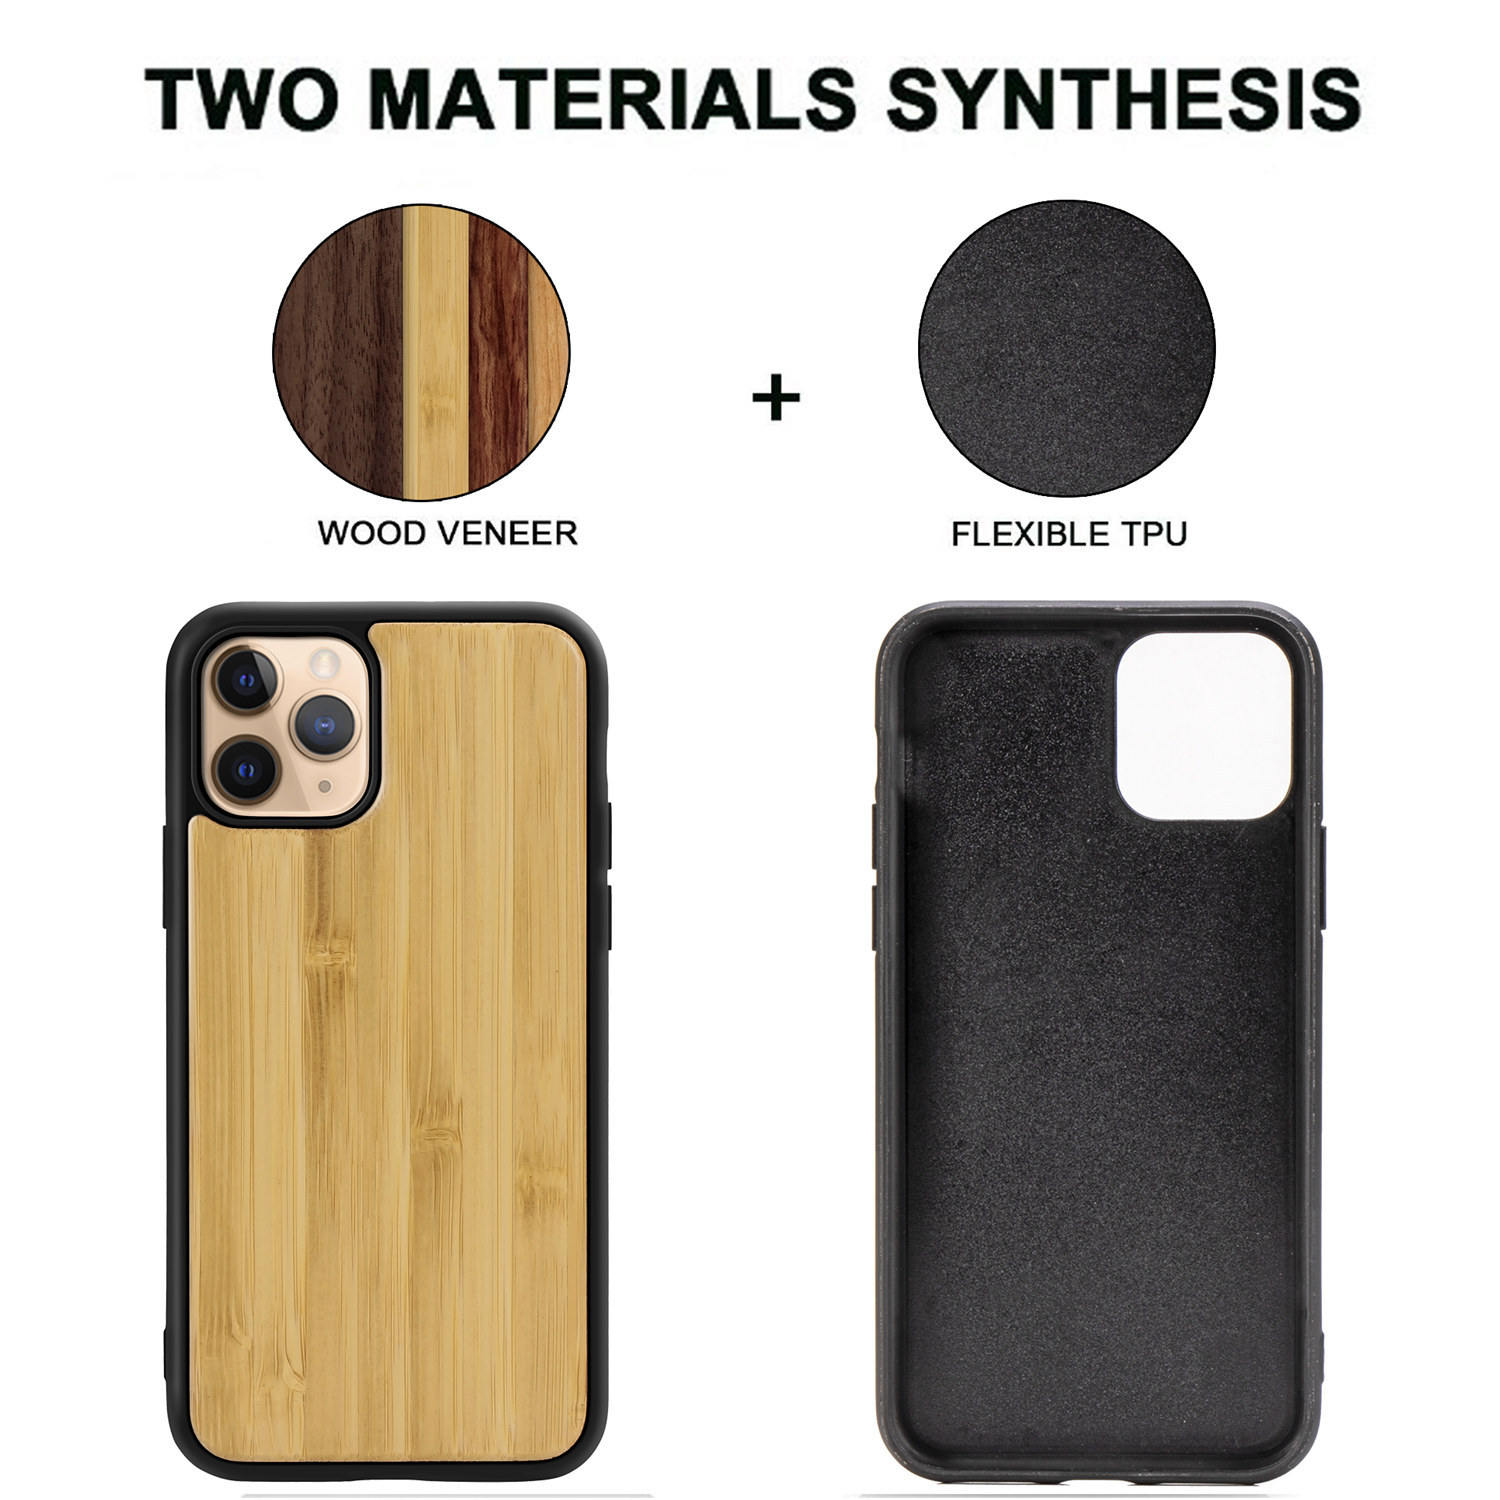 wooden+tpu mobile phone case